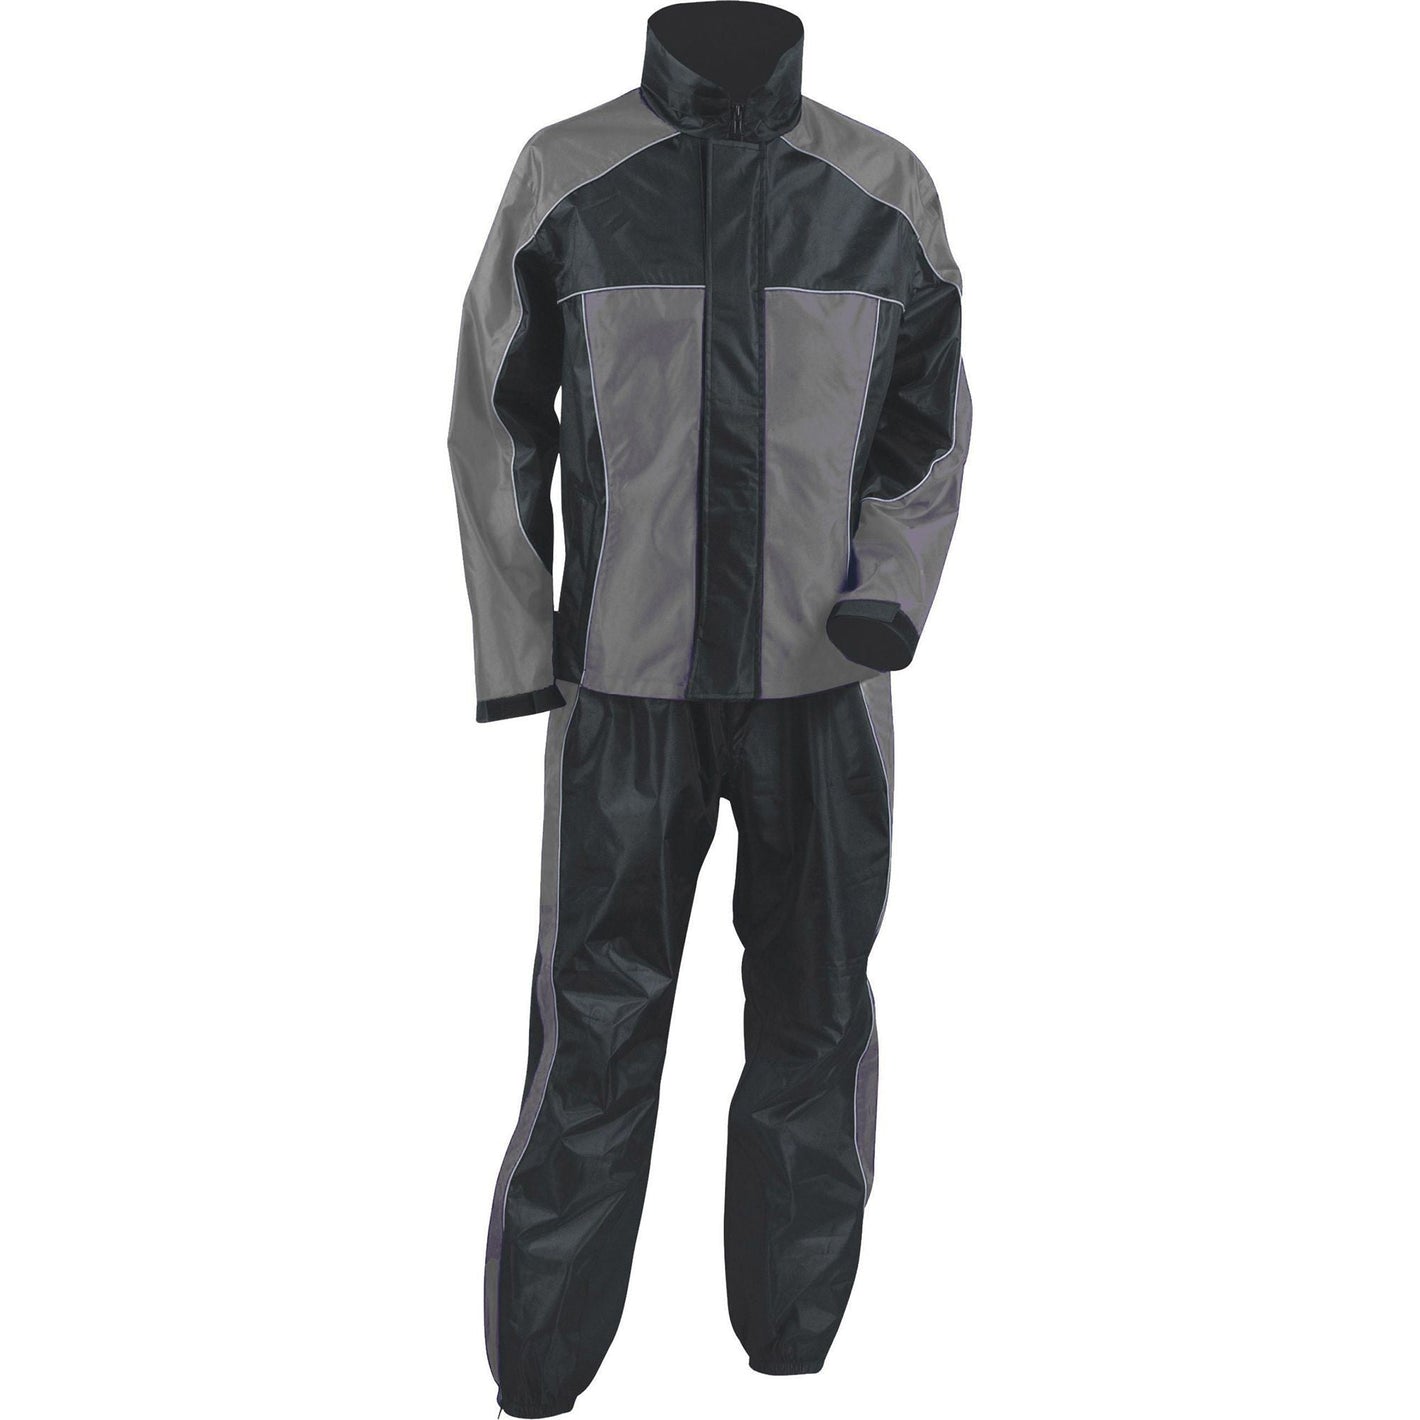 Ladies Black & Gray Rain Suit Water Proof w/ Reflective Piping